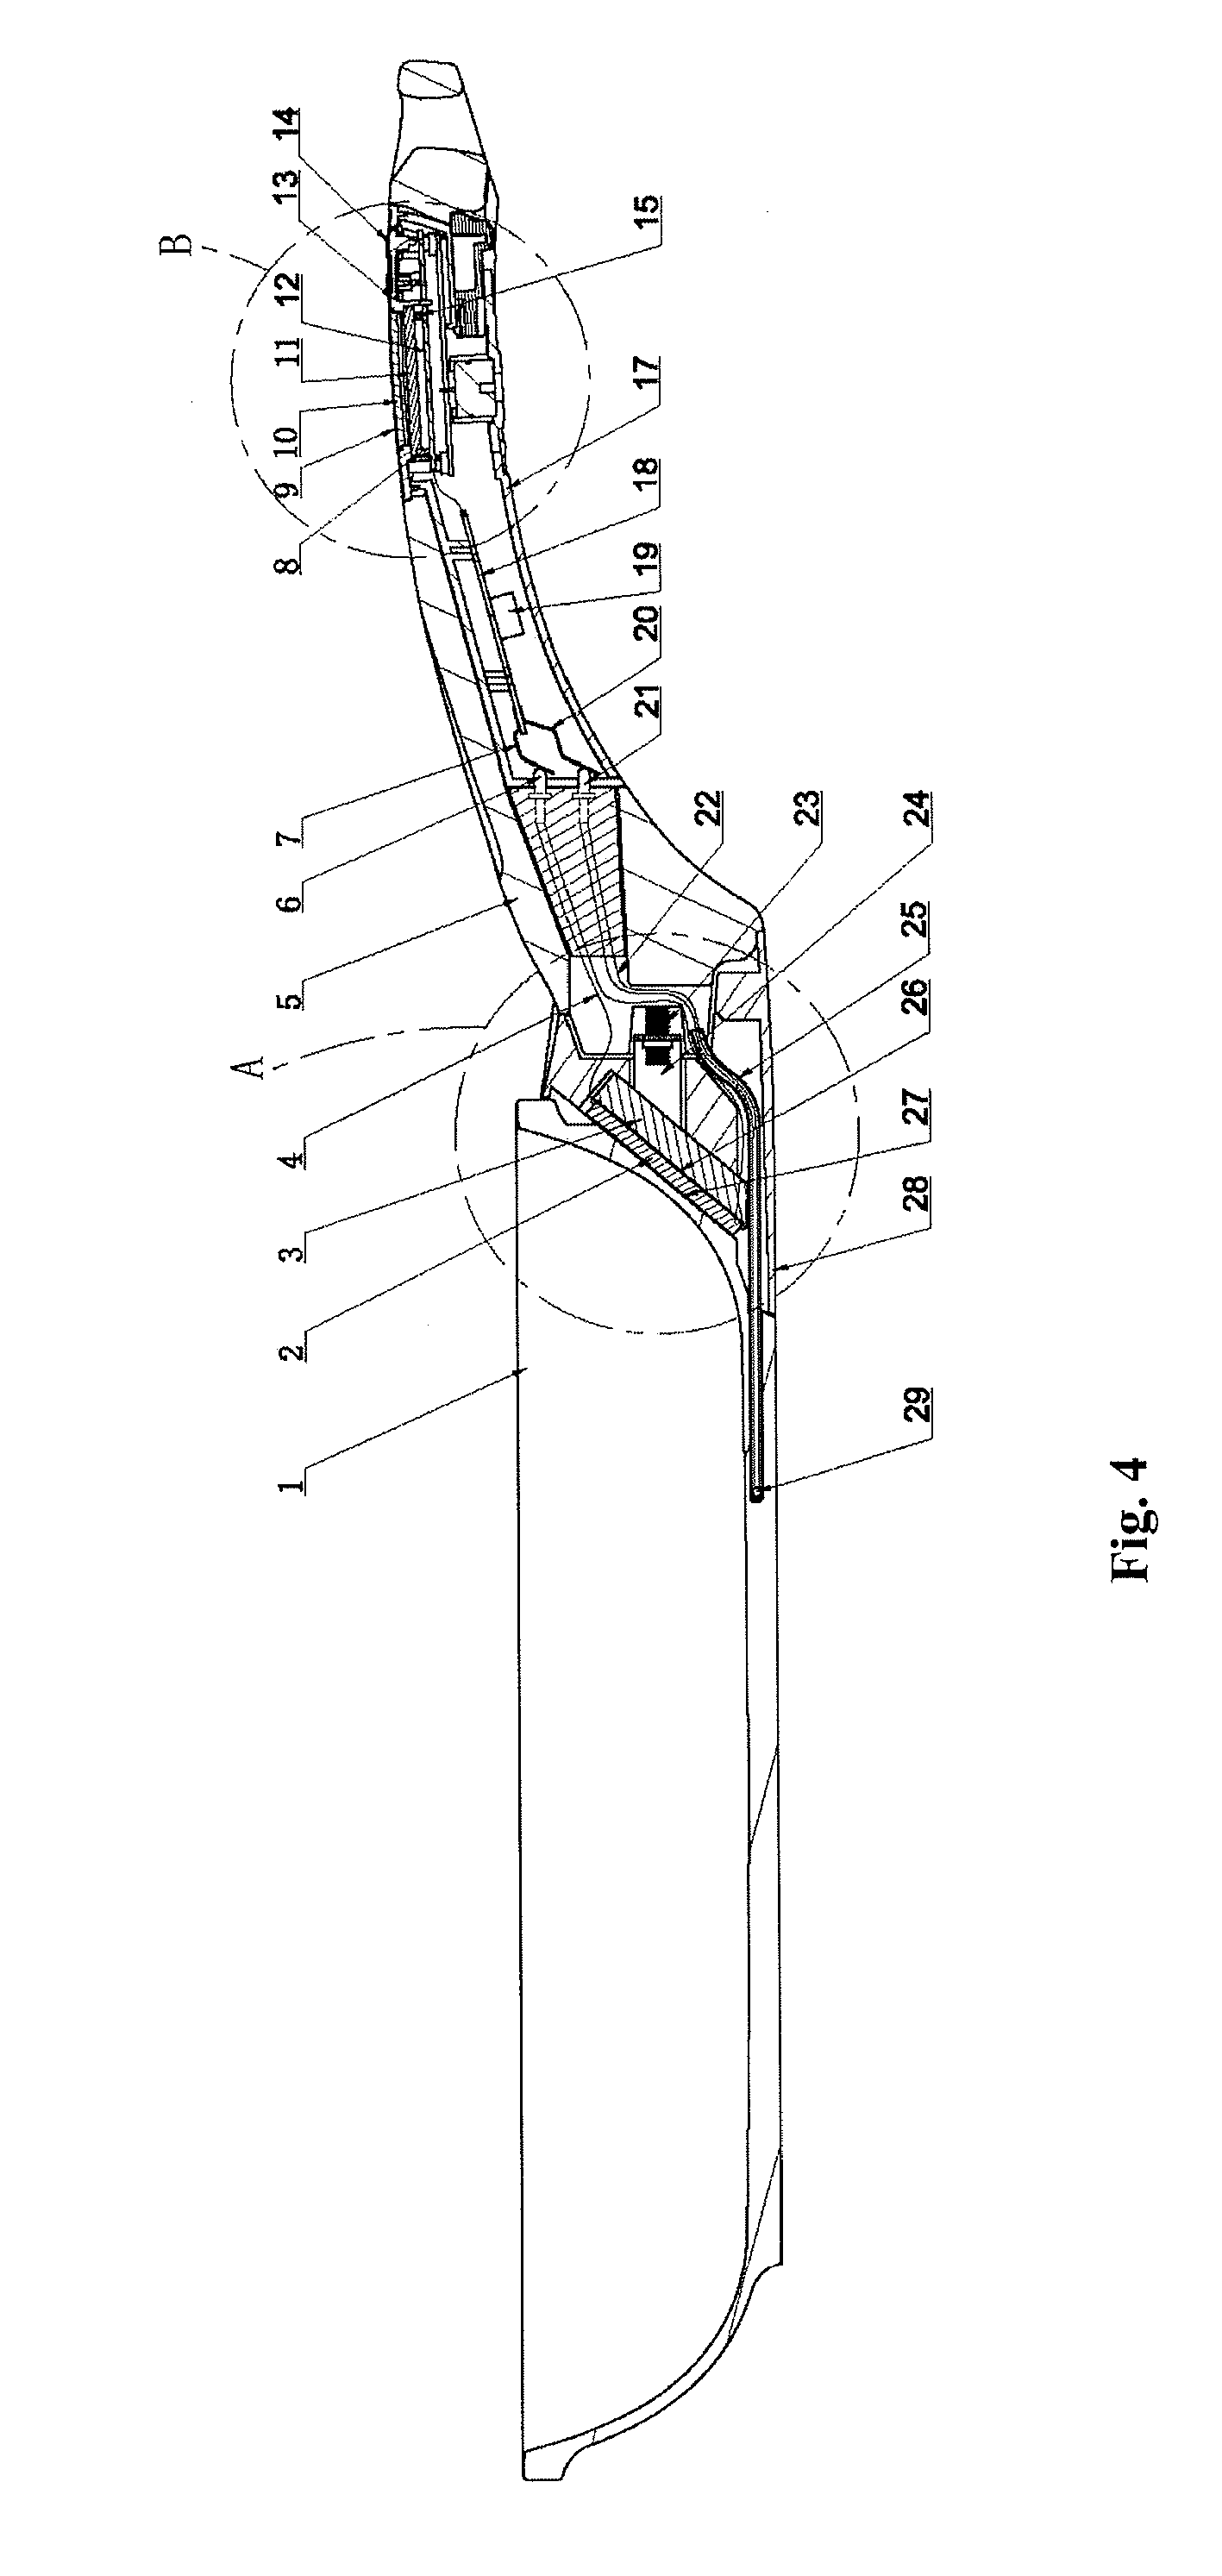 Electricity generating based on the difference in temperature electronic pan with a semiconductor refrigeration slice